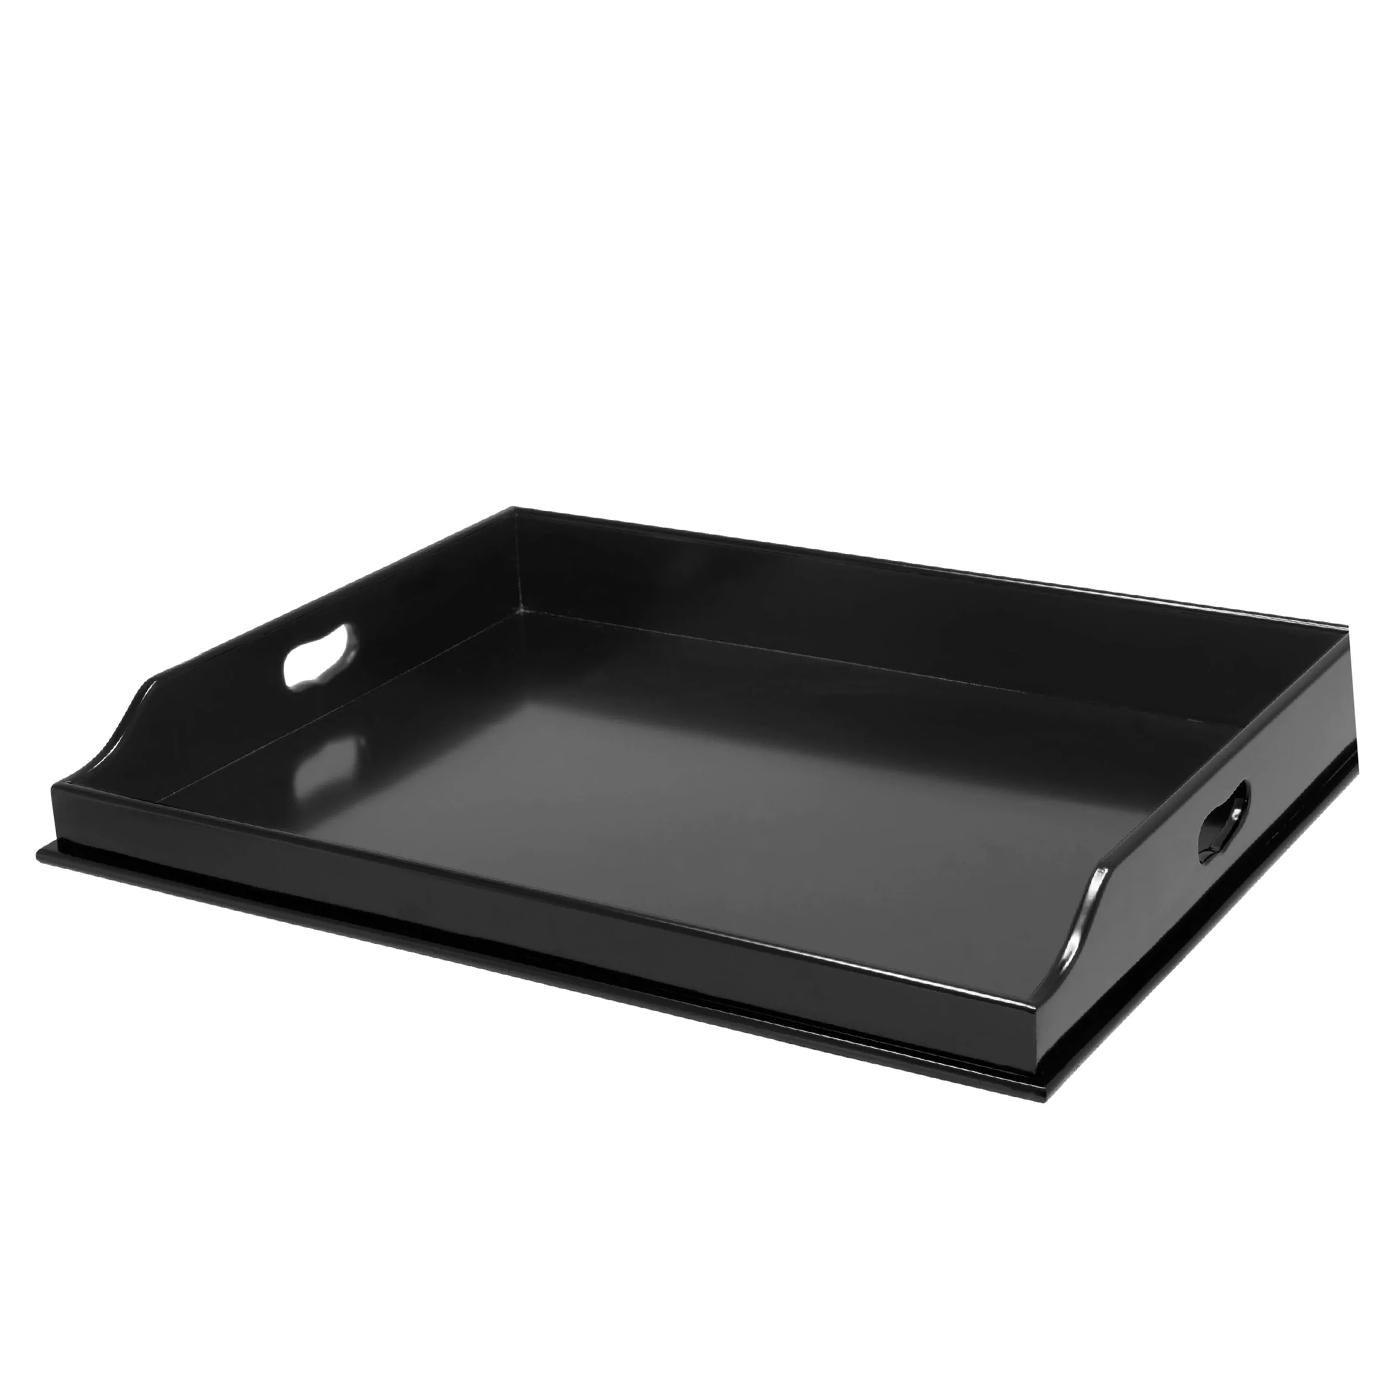 Tray Andrew Majordome in solid mahogany wood
in black lacquered finish. Movable tray on cross legs
base.